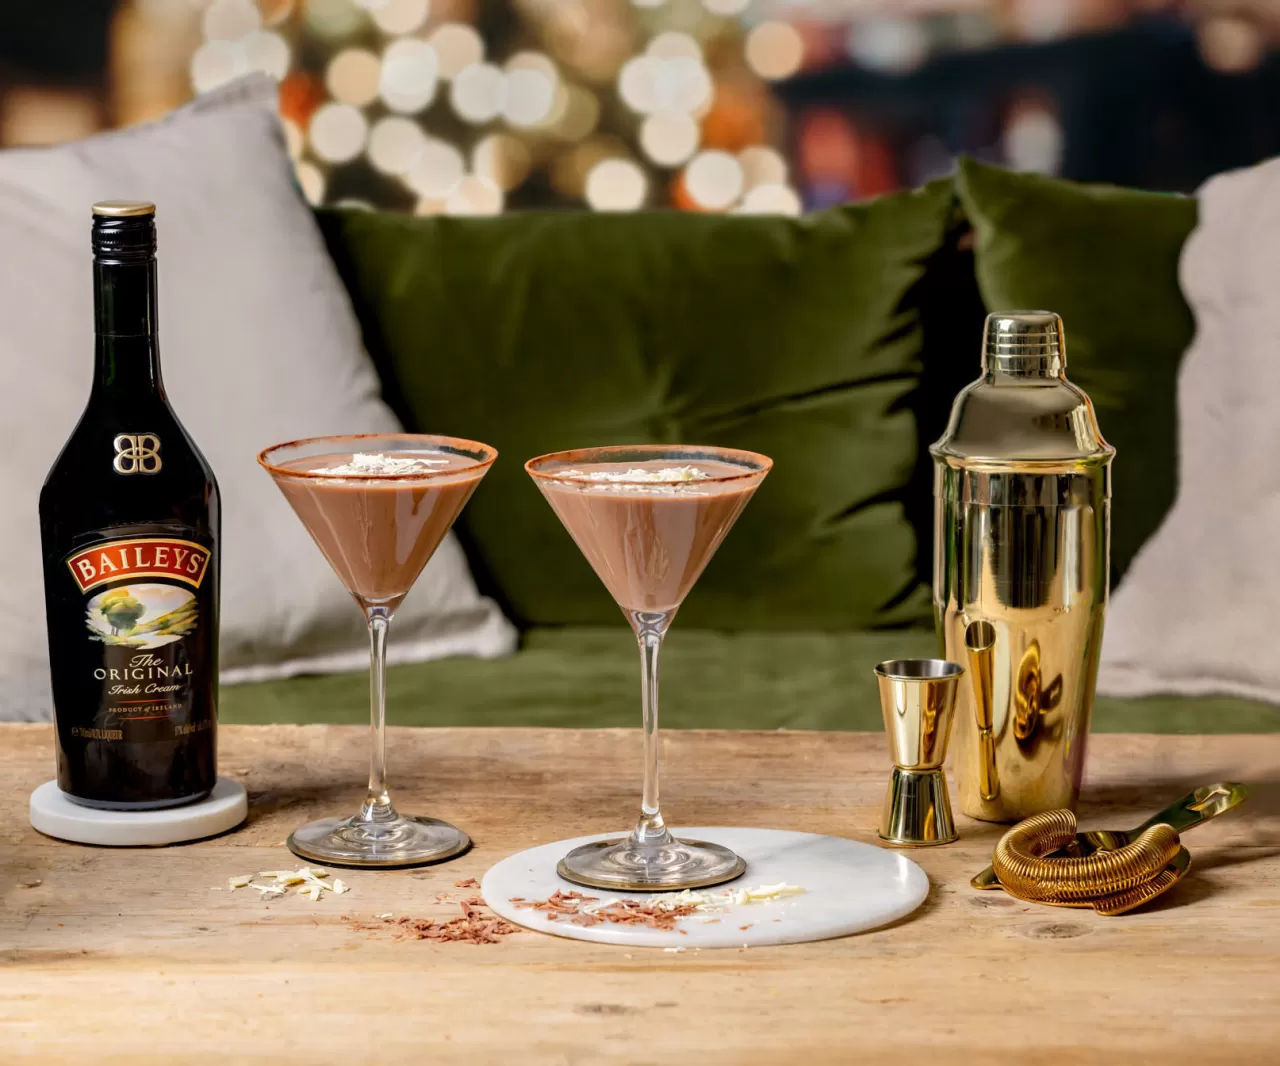 Christmas, Choctails and Festive Cheer! Treat yourself to a Baileys Hot Chocolate Martini Cocktail